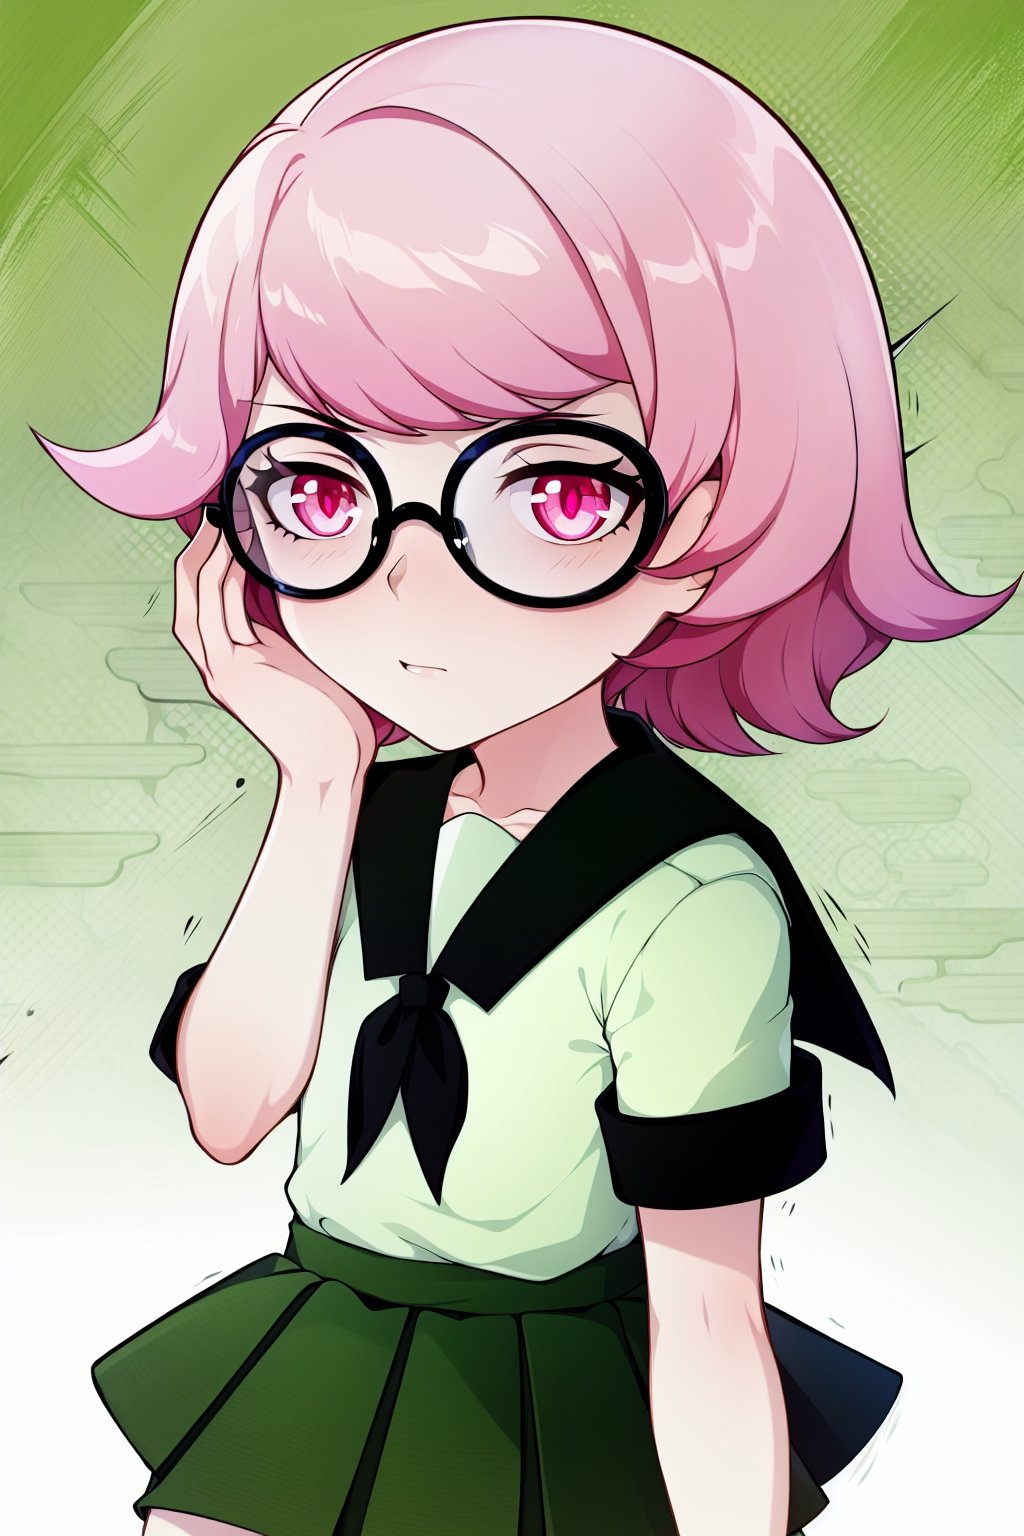 1 girl, solo, Saiki Kusuo, pale pink hair, disheveled hair, sharp hair, short hair, spiky hair, spiky bangs, crimson eyes, emotionless face, calm face, no emotions, cold face, Japanese school uniform, short green skirt, white shirt with short arms, green shirt collar, oval glasses, thin-rimmed glasses, black frame,

,